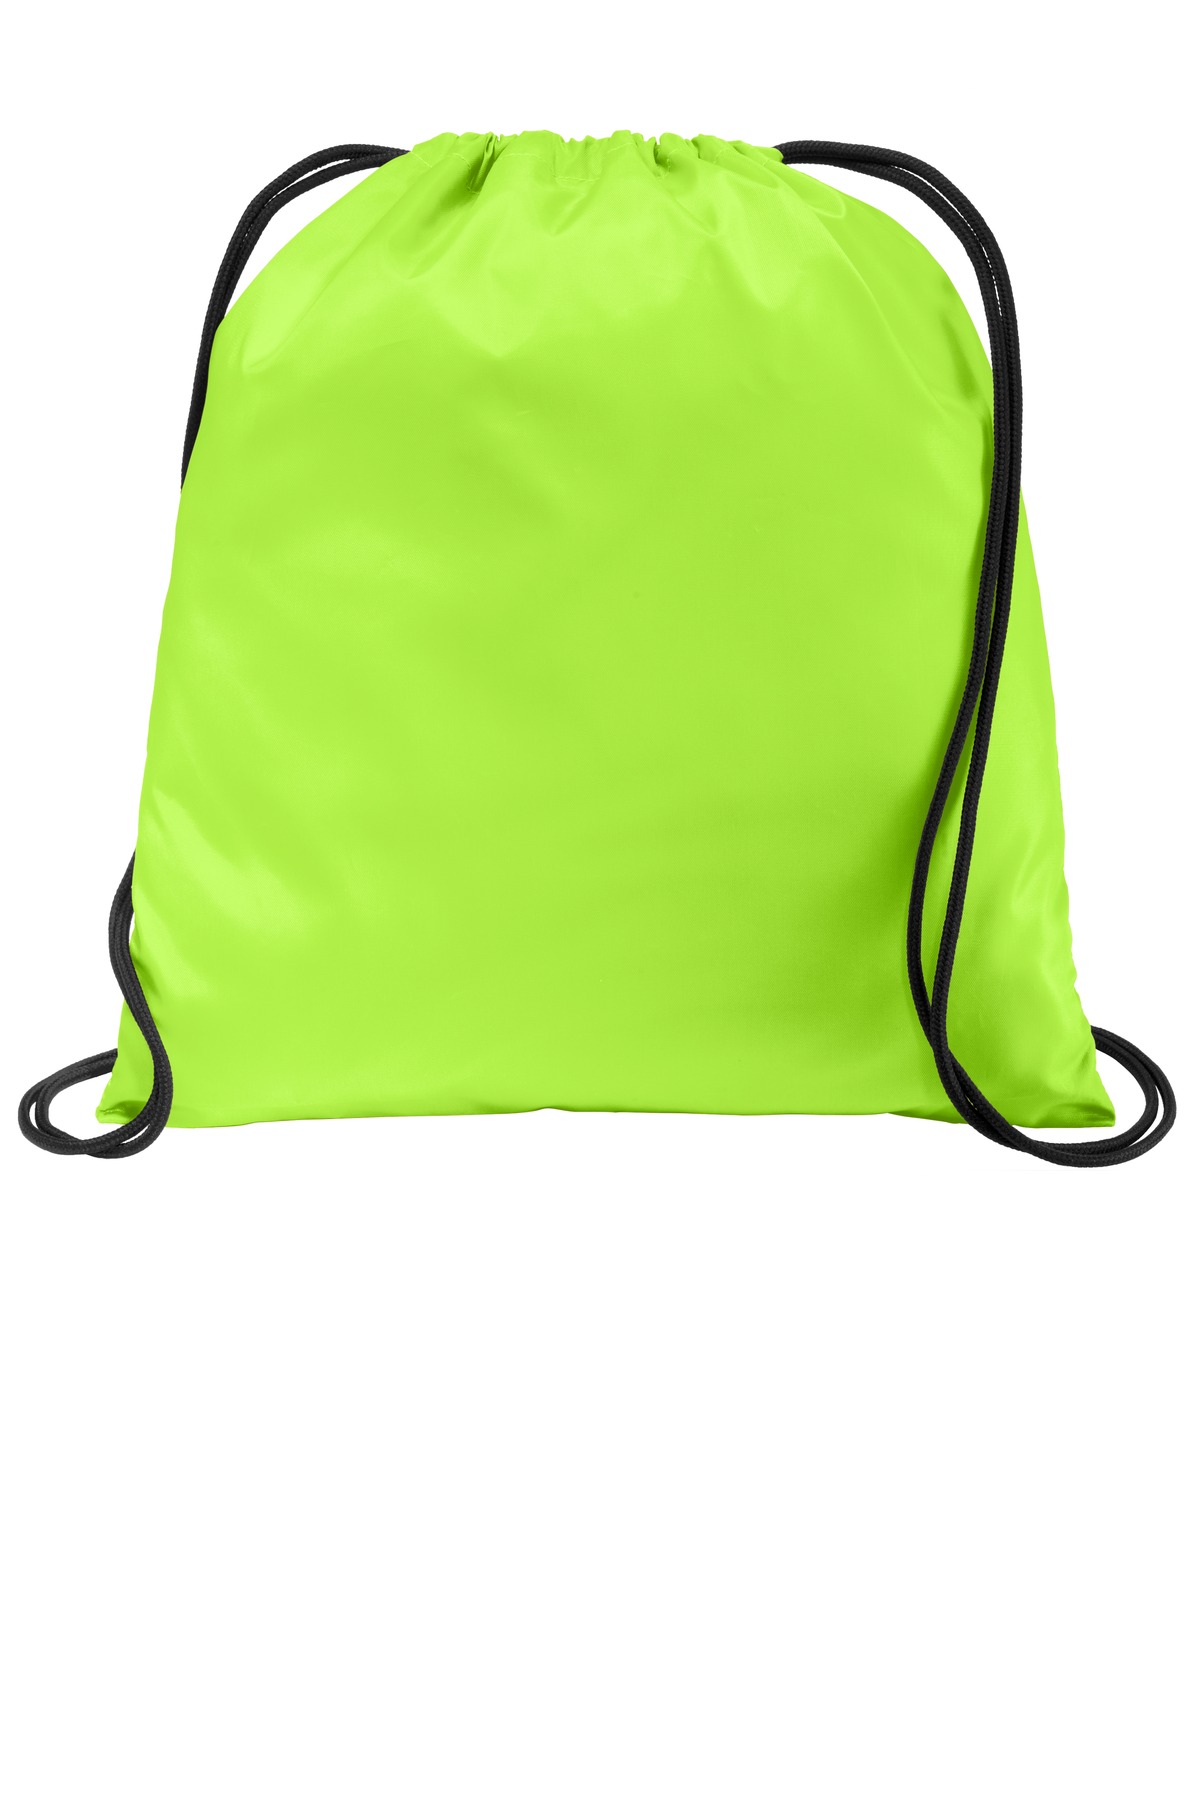 Port Authority Ultra-Core Cinch Pack Bg615 - Lime Shock - One Size - image 1 of 2